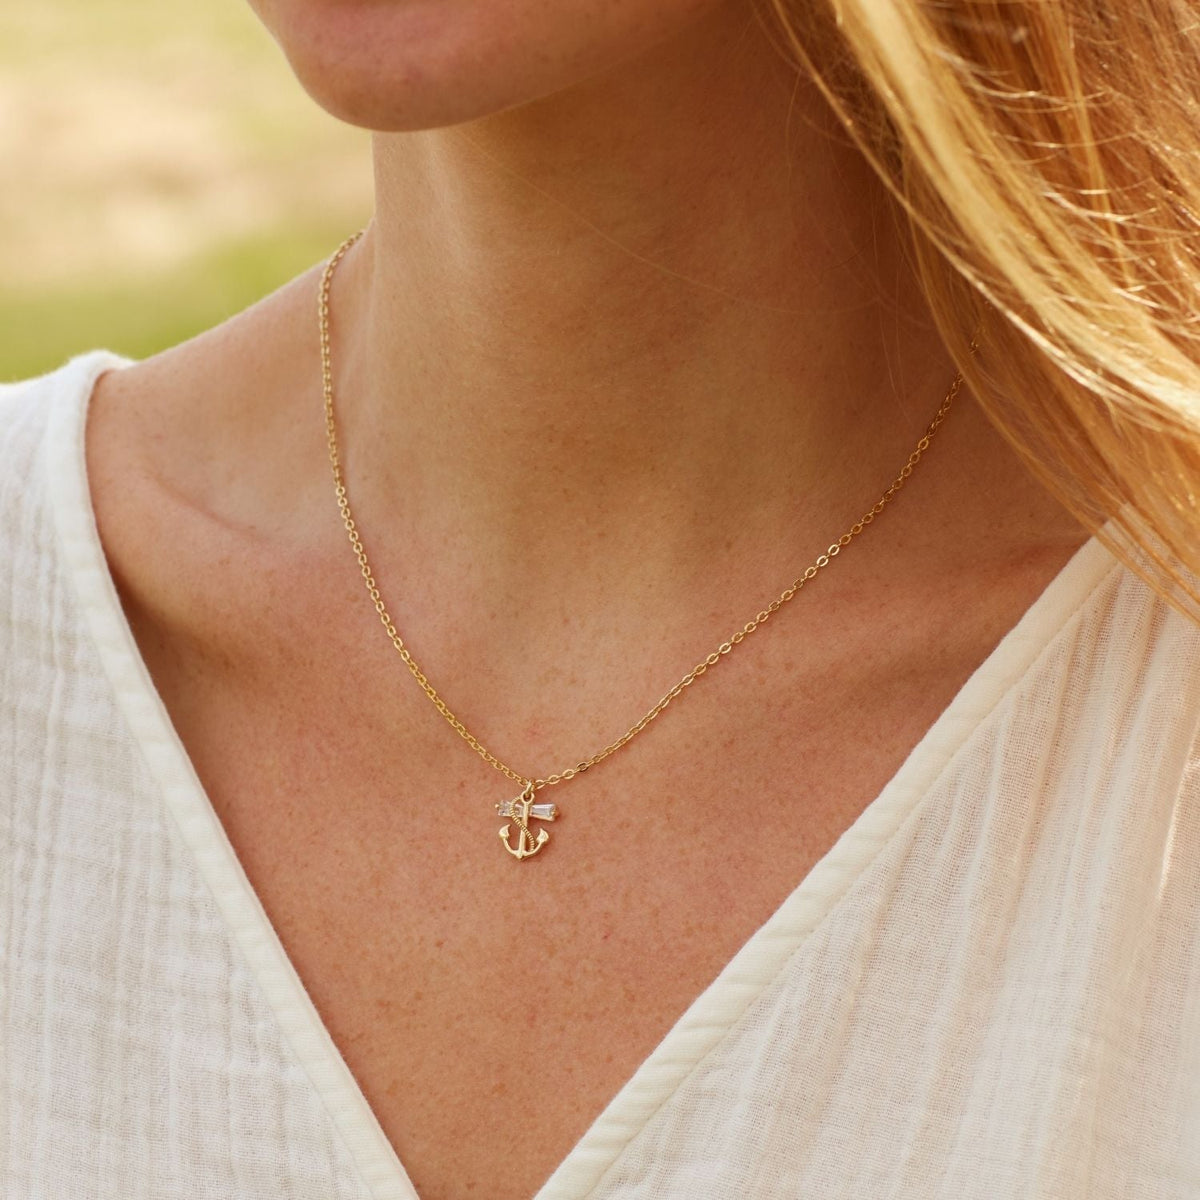 In Loving Memory of your Mom | Her Memory a Treasure | Anchor Necklace